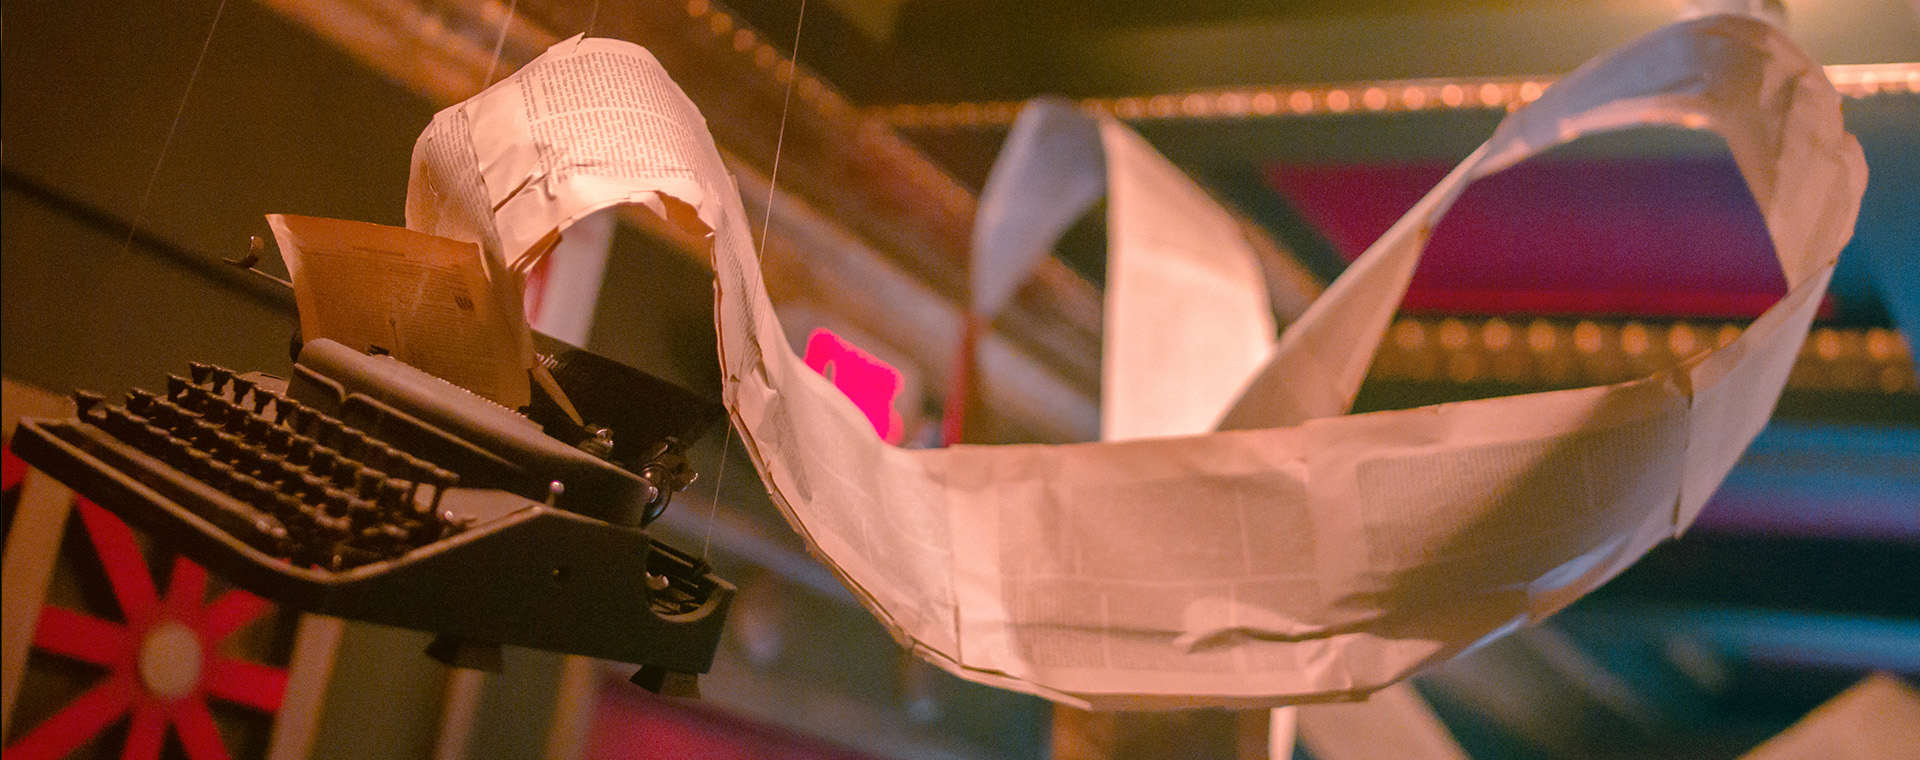 A typewriter suspended from a ceiling with pages flowing out of it